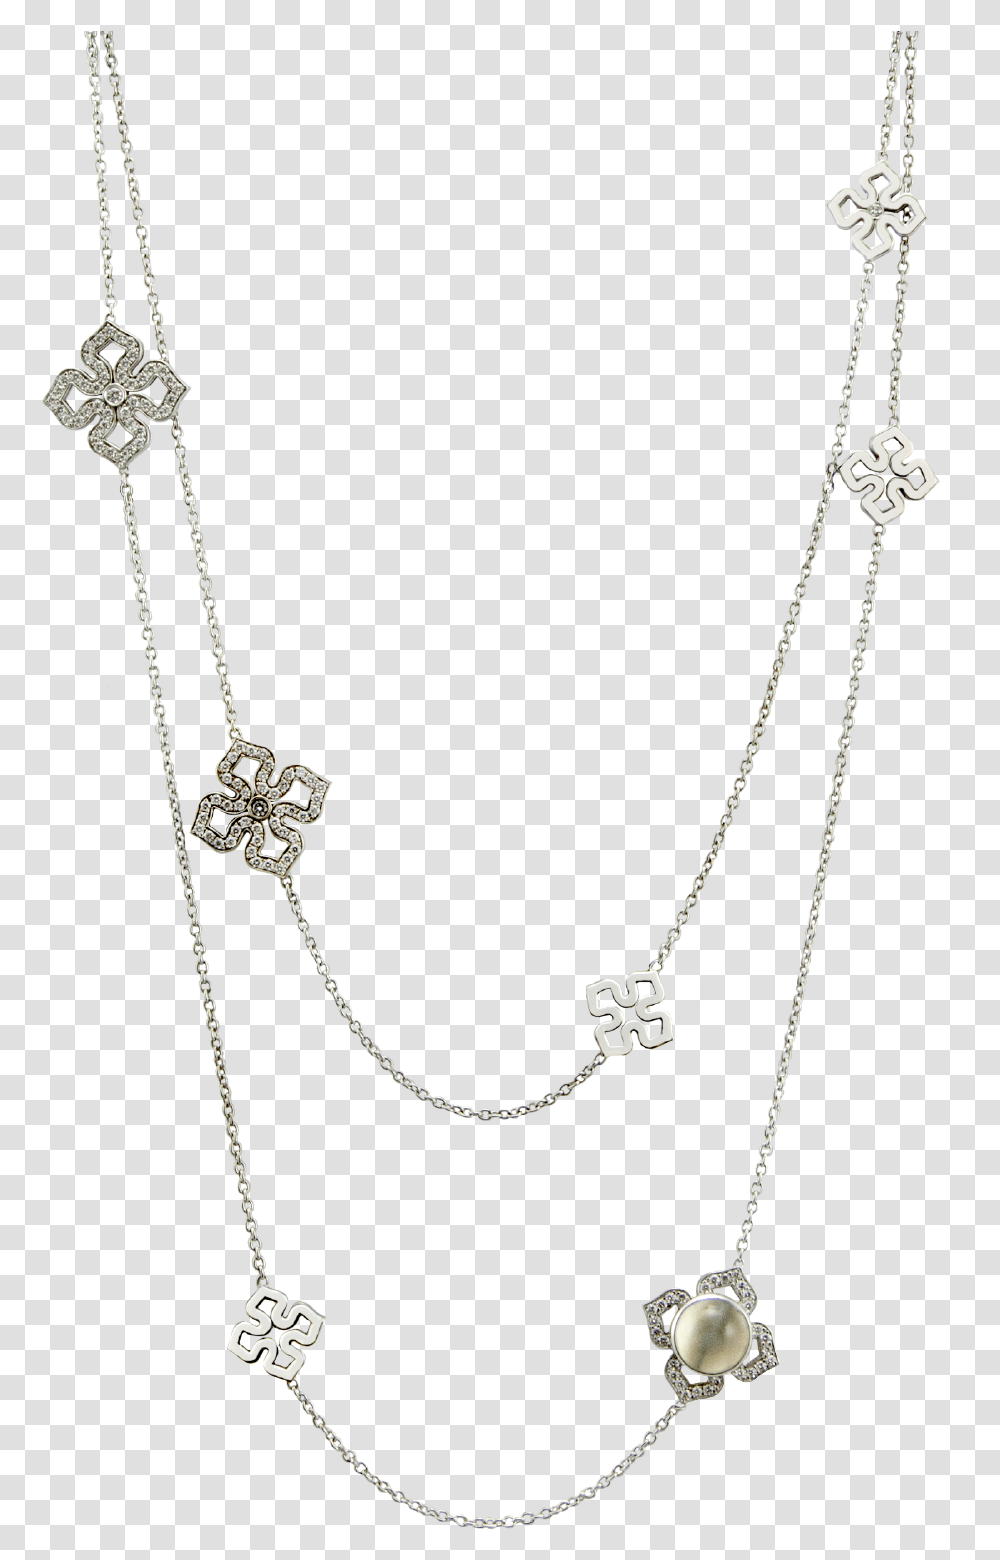 Necklace White Gold Sautoir Diamonds Necklace, Jewelry, Accessories, Accessory, Gemstone Transparent Png